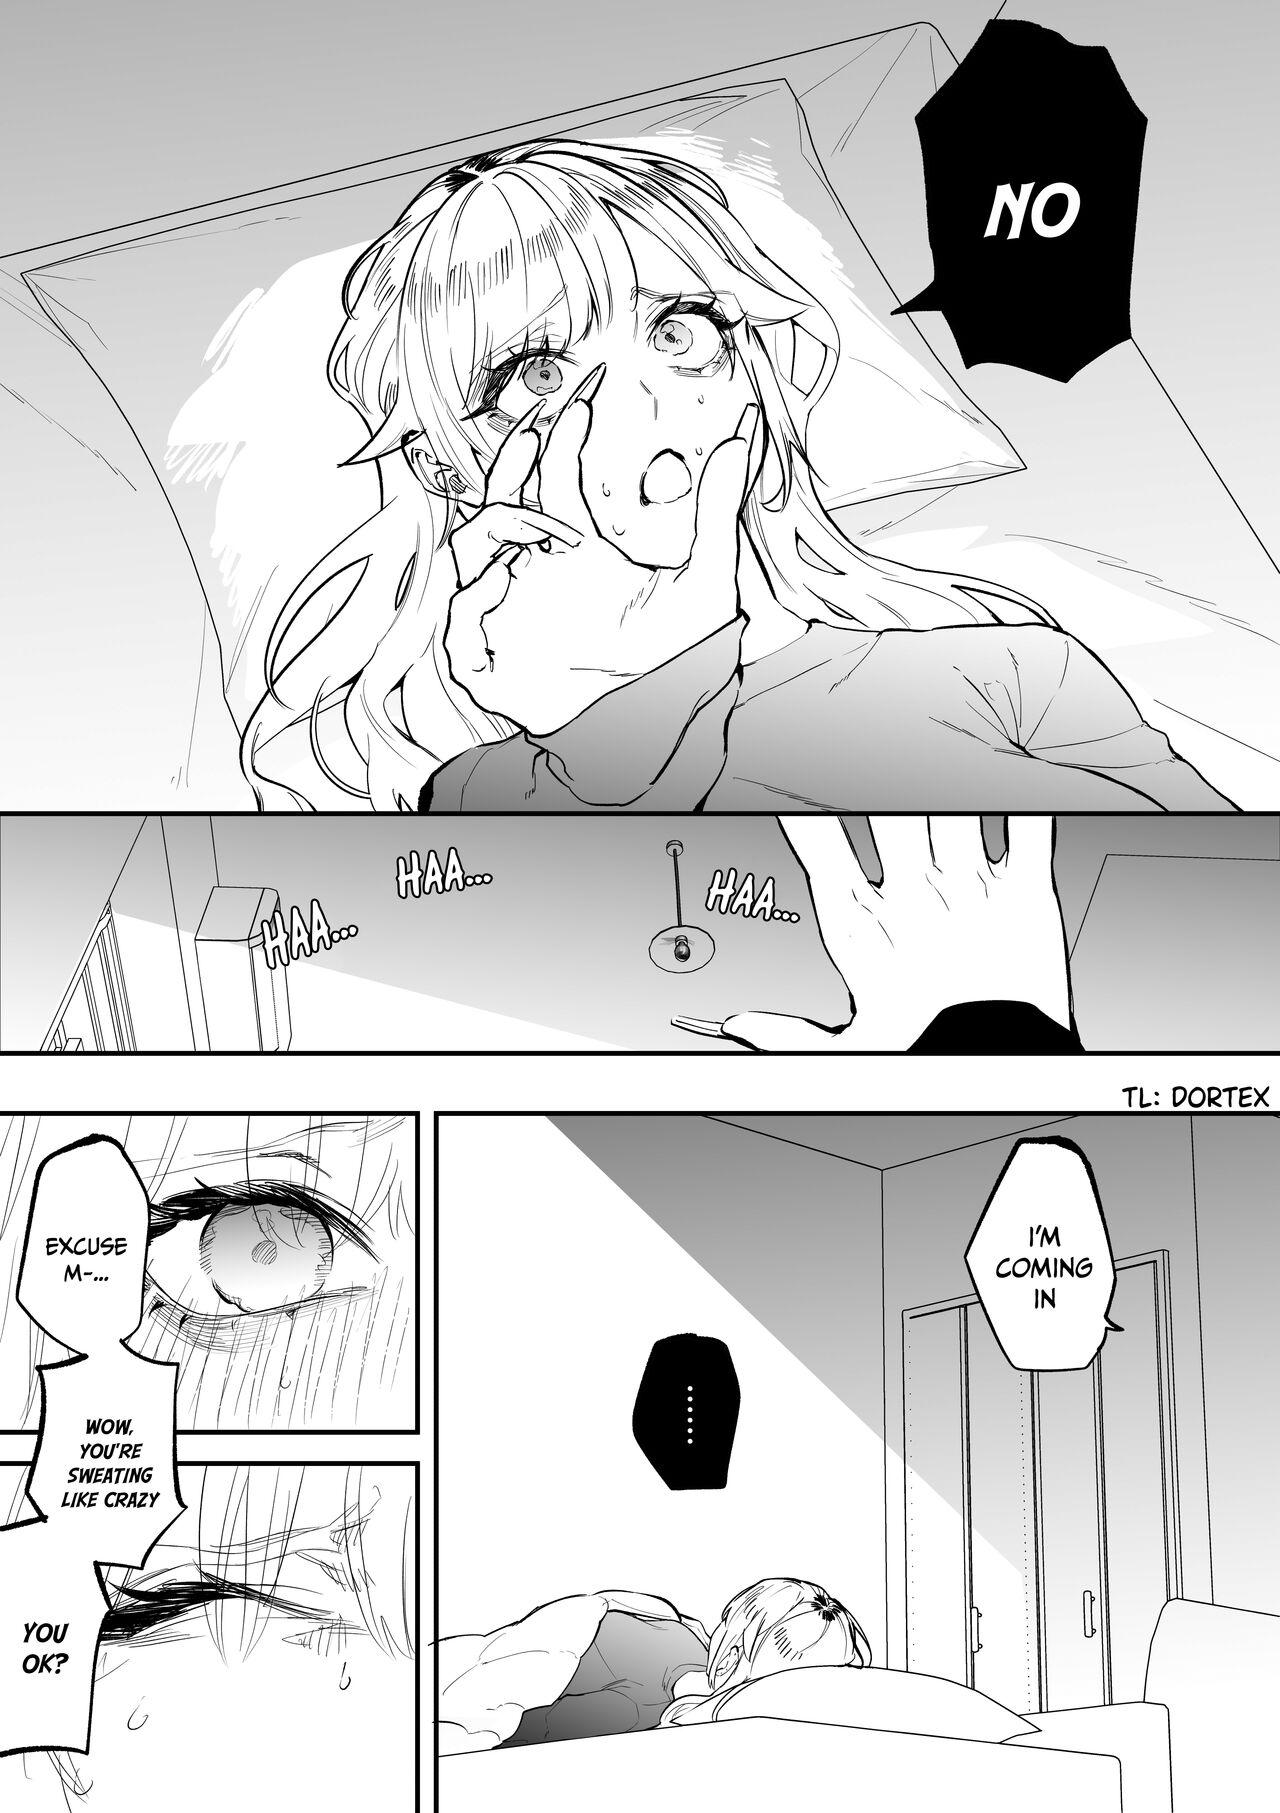 The Day I Decided to Make My Cheeky Gyaru Sister Understand in My Own Way (Fanbox 18+ Content) - Ch. 2.6 - In a Dream 3